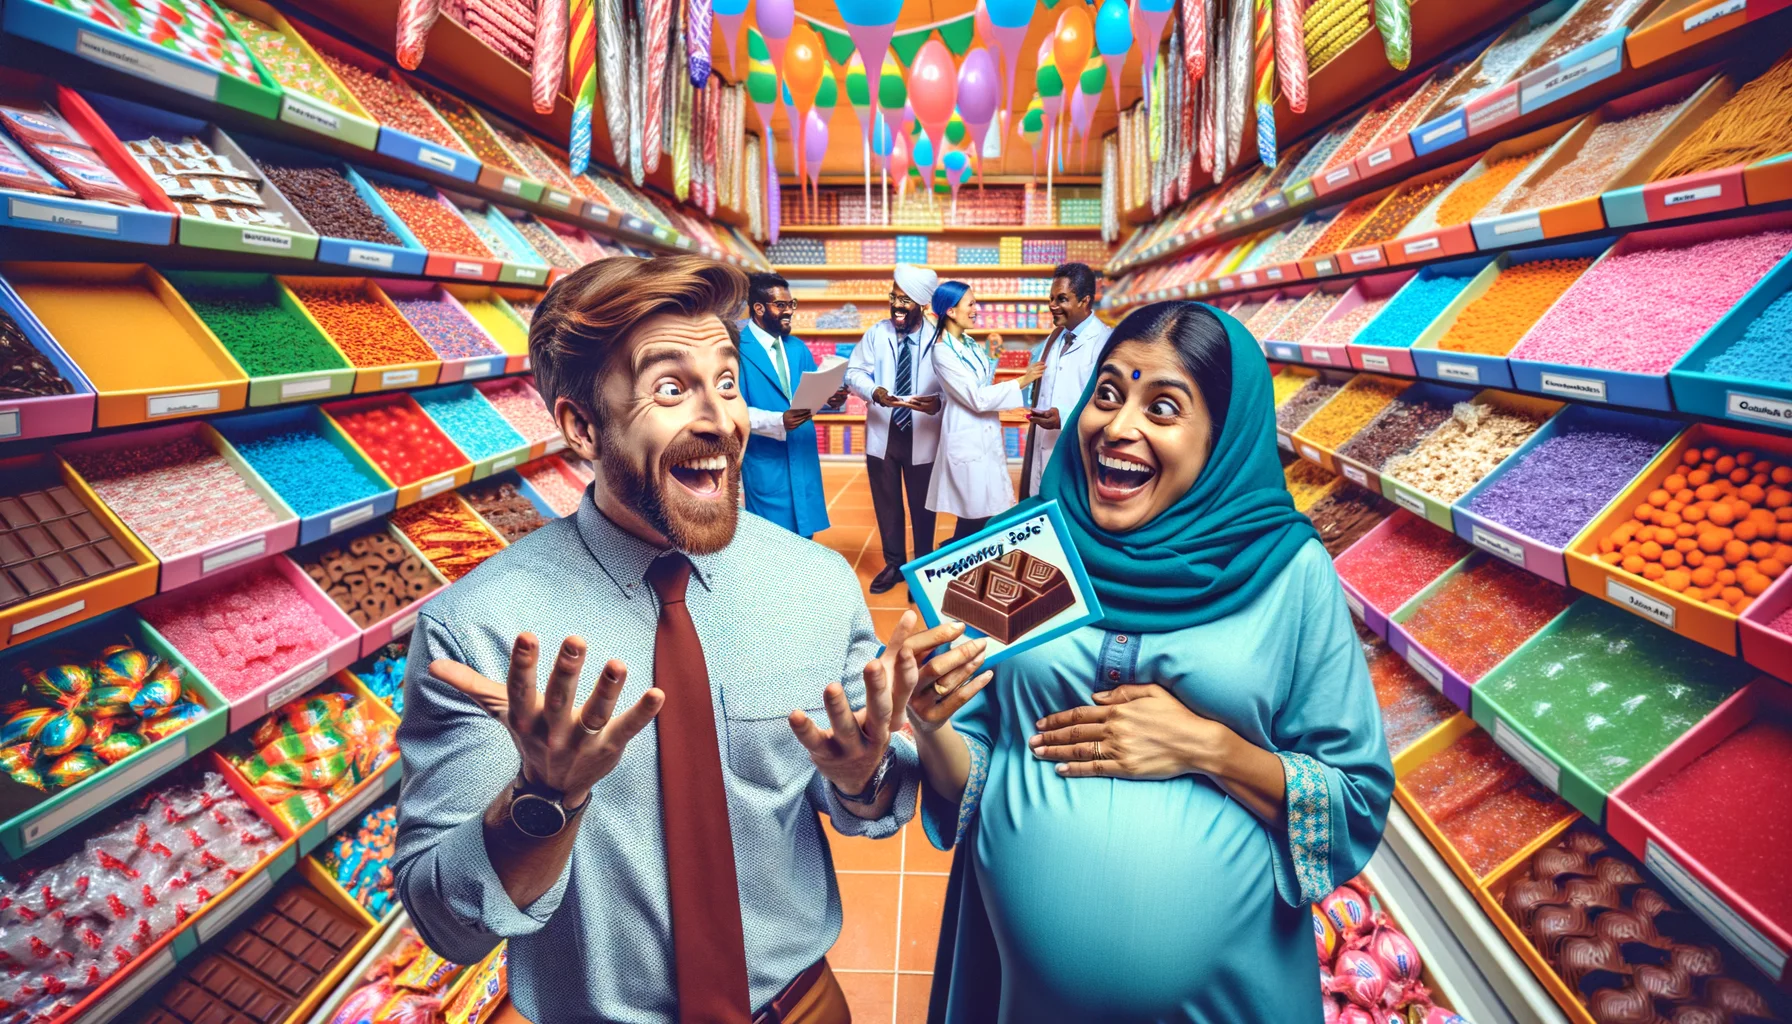 Imagine a humorous and lifelike image displaying a range of 'Pregnancy-Safe Candy Options'. In this scenario, an excited Caucasian soon-to-be dad and an enthusiastic South-Asian pregnant mom are in a candy store filled with a multitude of bright candy options. They are puzzled and surprised at the variety of options. Among these options are sugar-free candies, lollipops, chocolate bars, and fruit-flavored gummies, all marked with a sign saying 'Pregnancy-Safe'. The mom-to-be is holding a candy so gigantic it's nearly her size, causing them both burst into laughter. The background is filled with vibrant candy shelves, a smiling shopkeeper, and other customers of diverse descents and genders, enhancing the lively atmosphere of the scene.